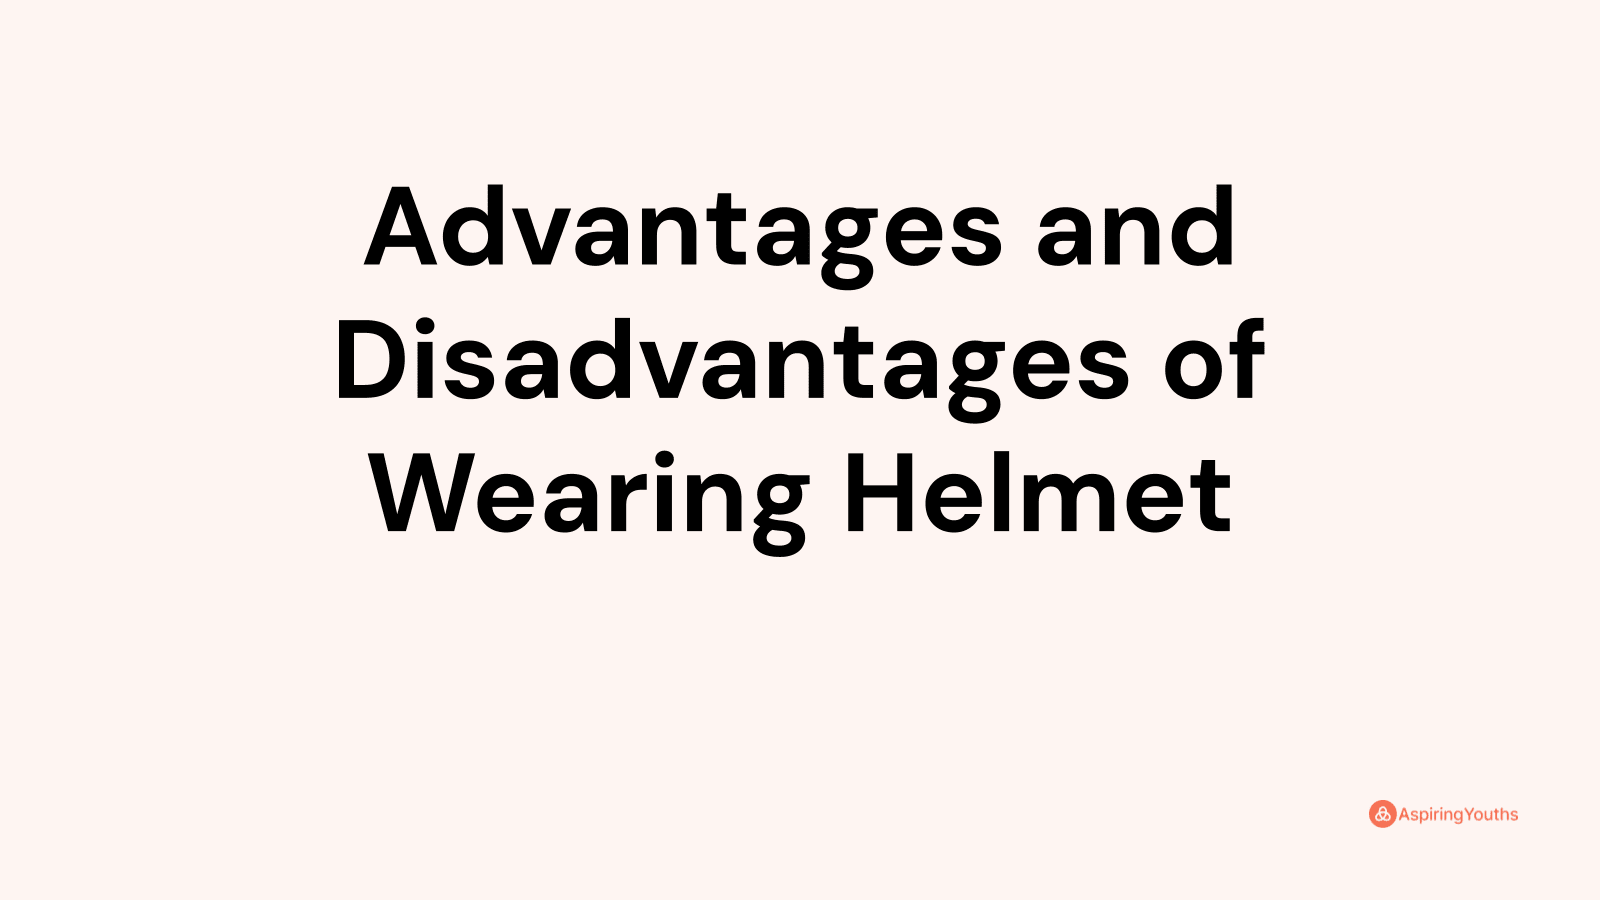 Advantages and disadvantages of Wearing Helmet